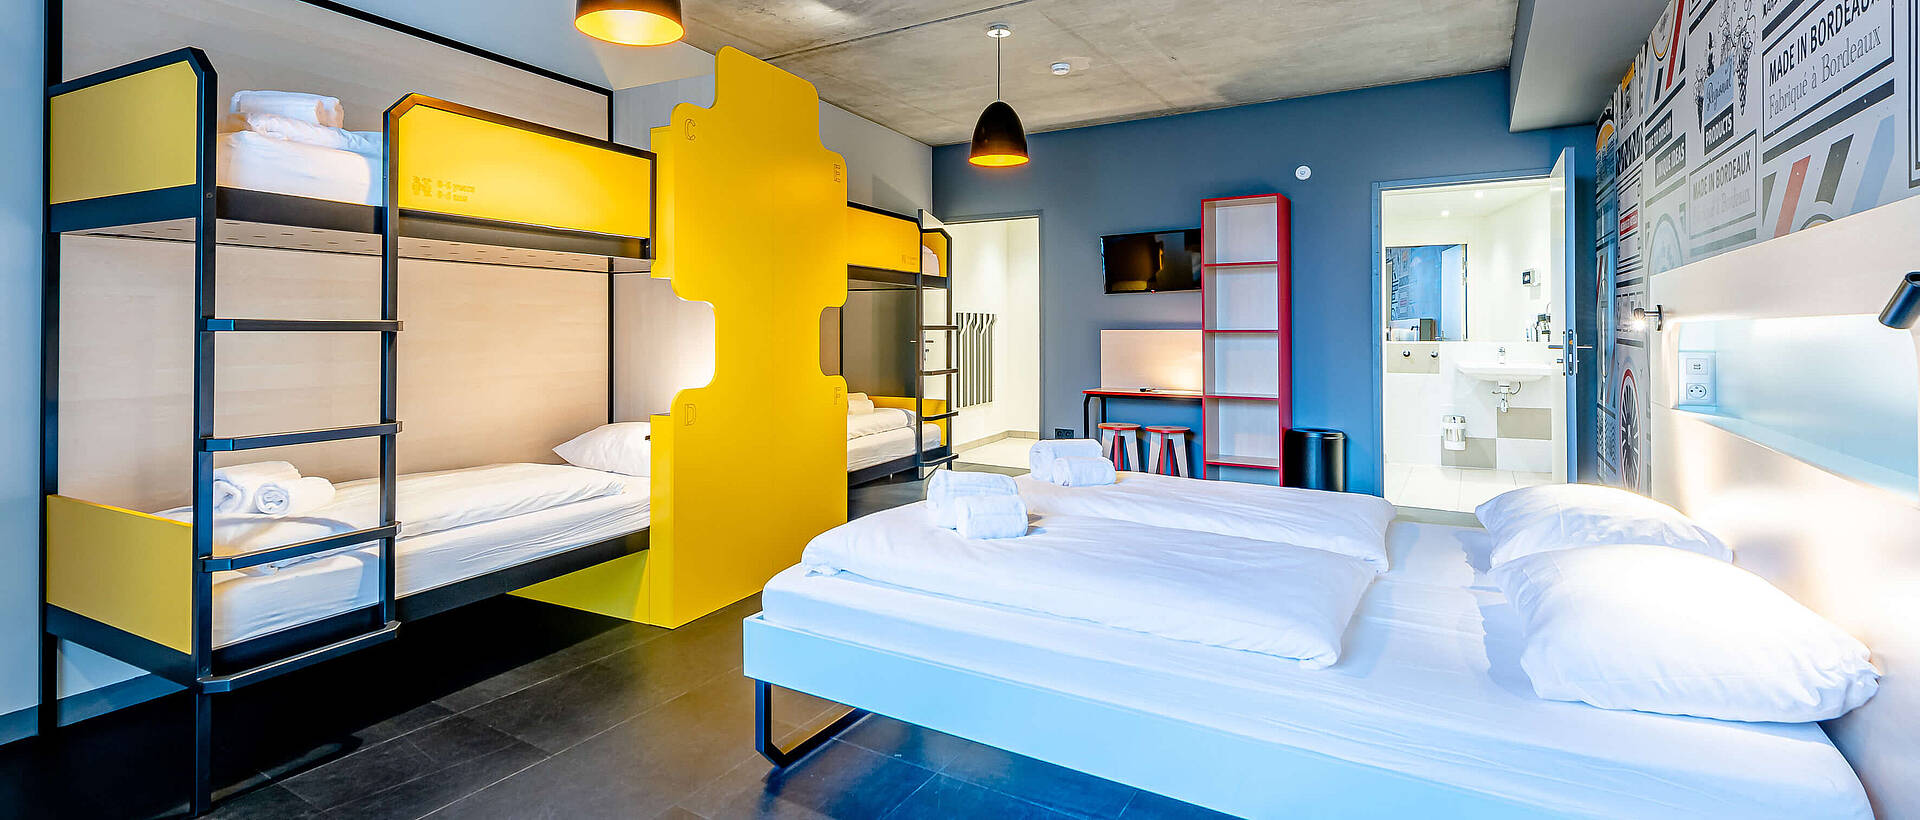 Hotel for groups: Multibed room